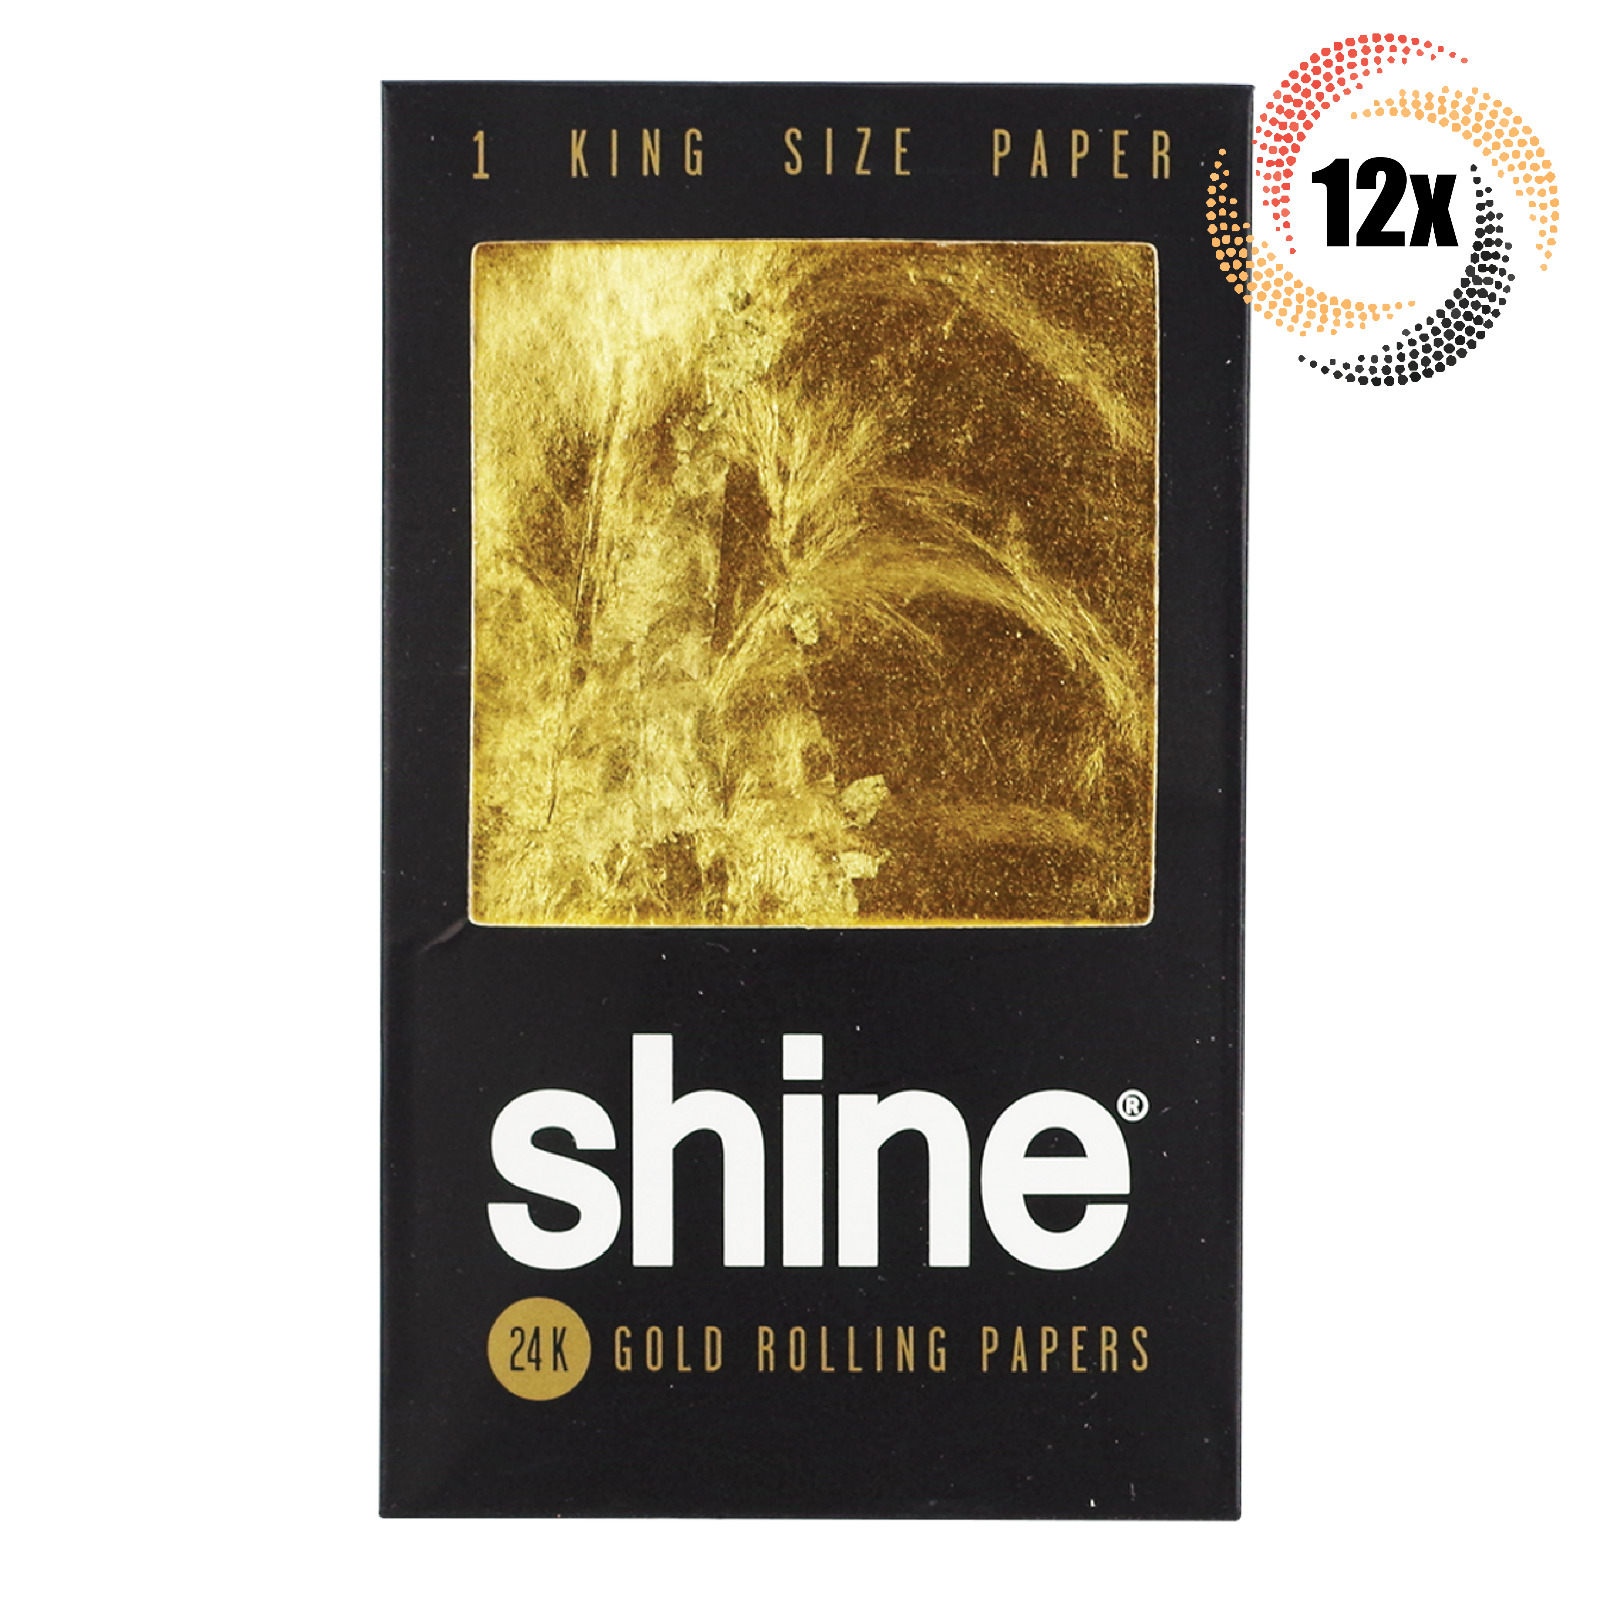 12x Packs Shine 24k Gold Rolling Papers King | 1 Paper Per Pack | + 2 Free Tubes